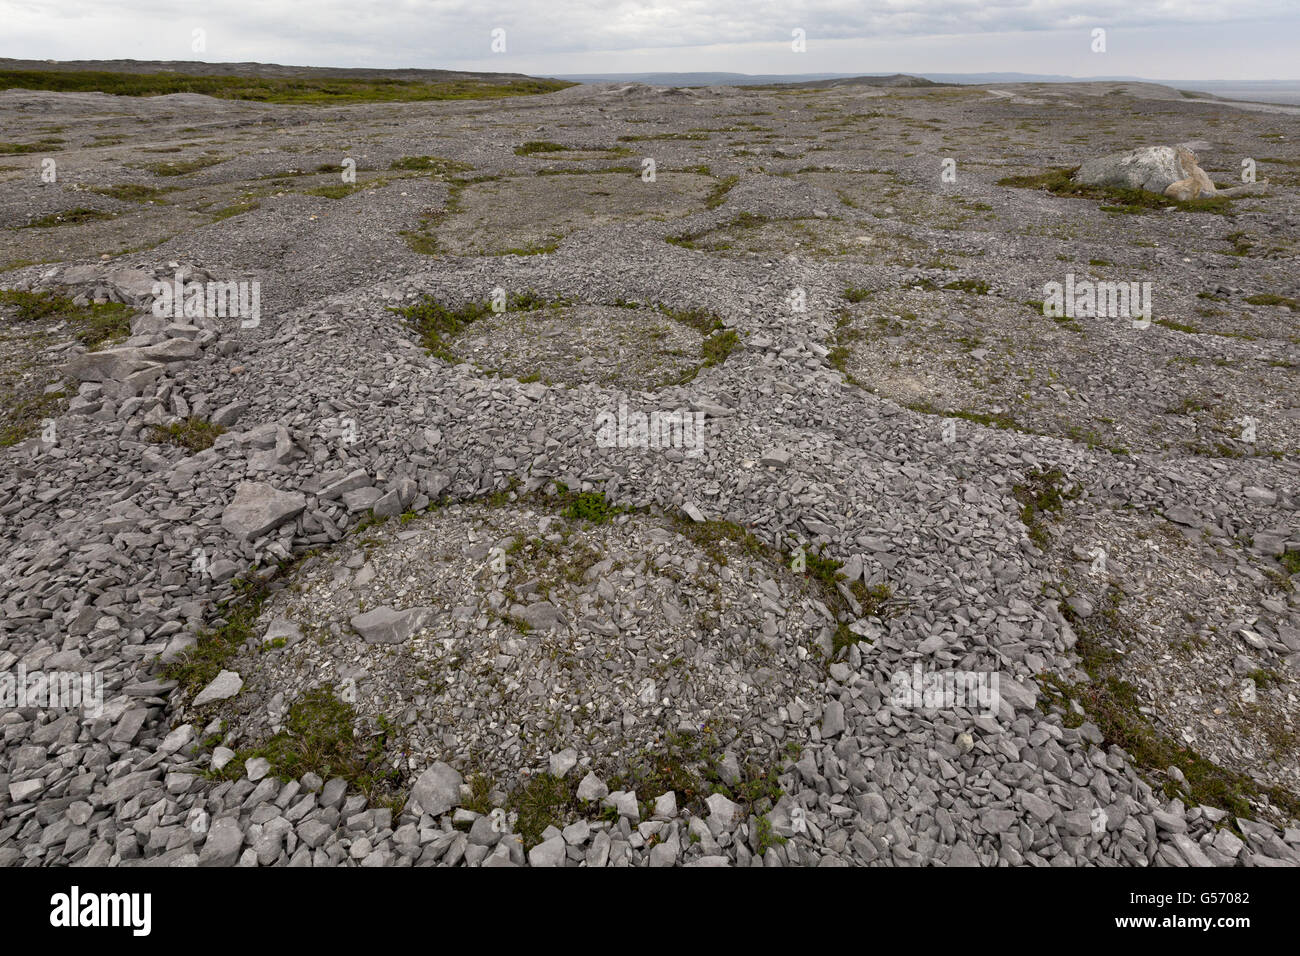 Frost polygons and other permafrost effects on Ordovician limestone, Burnt Cape Ecological Reserve, Raleigh, Great Northern Peninsula, Newfoundland, Canada, July Stock Photo